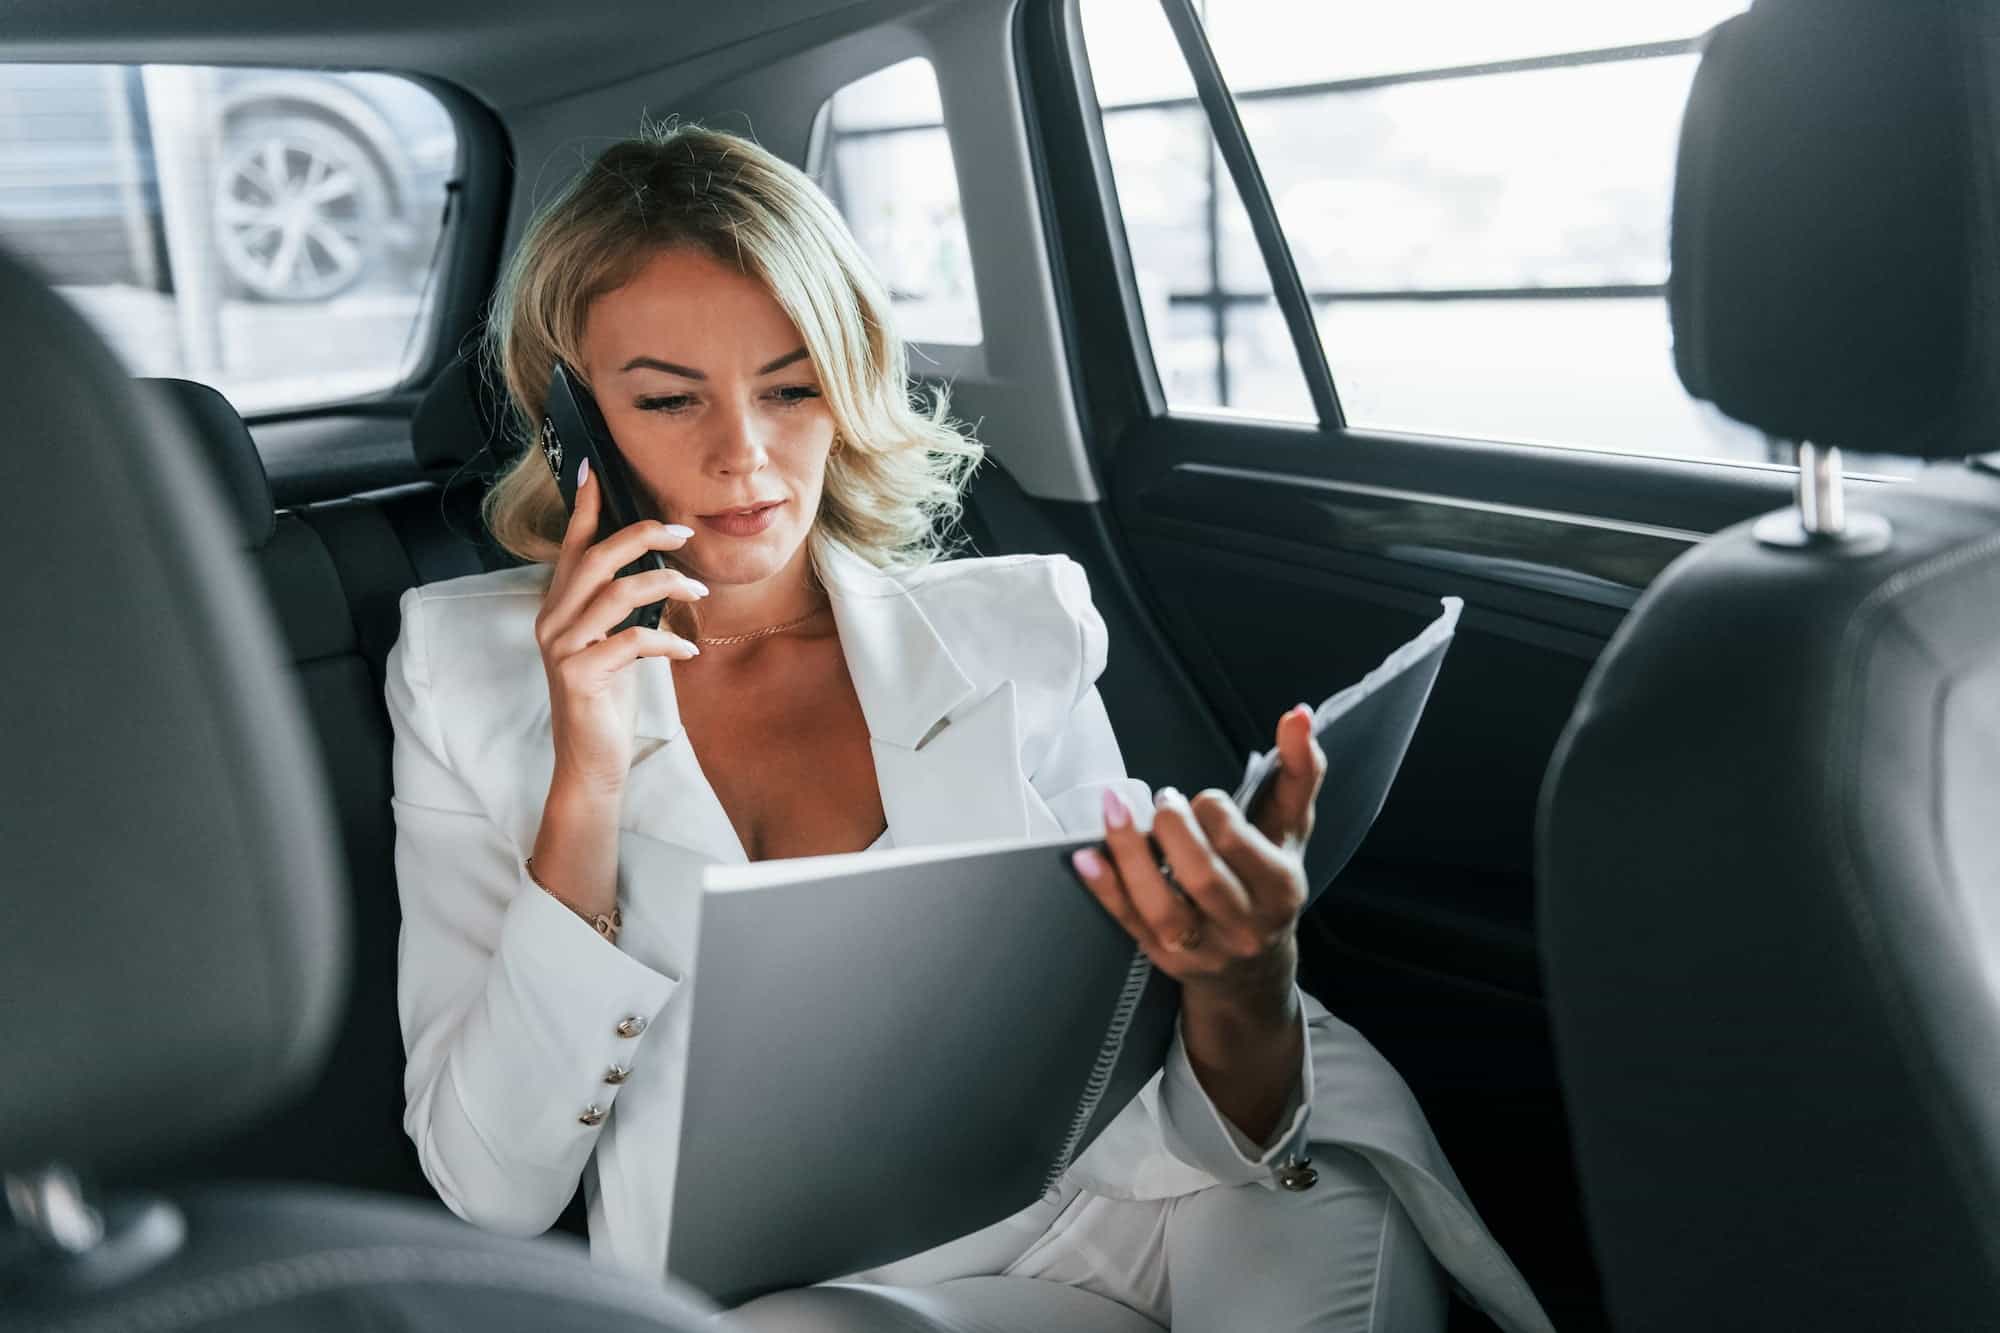 Working in the car. Woman in formal clothes traveling Stress-free between locations in limousine